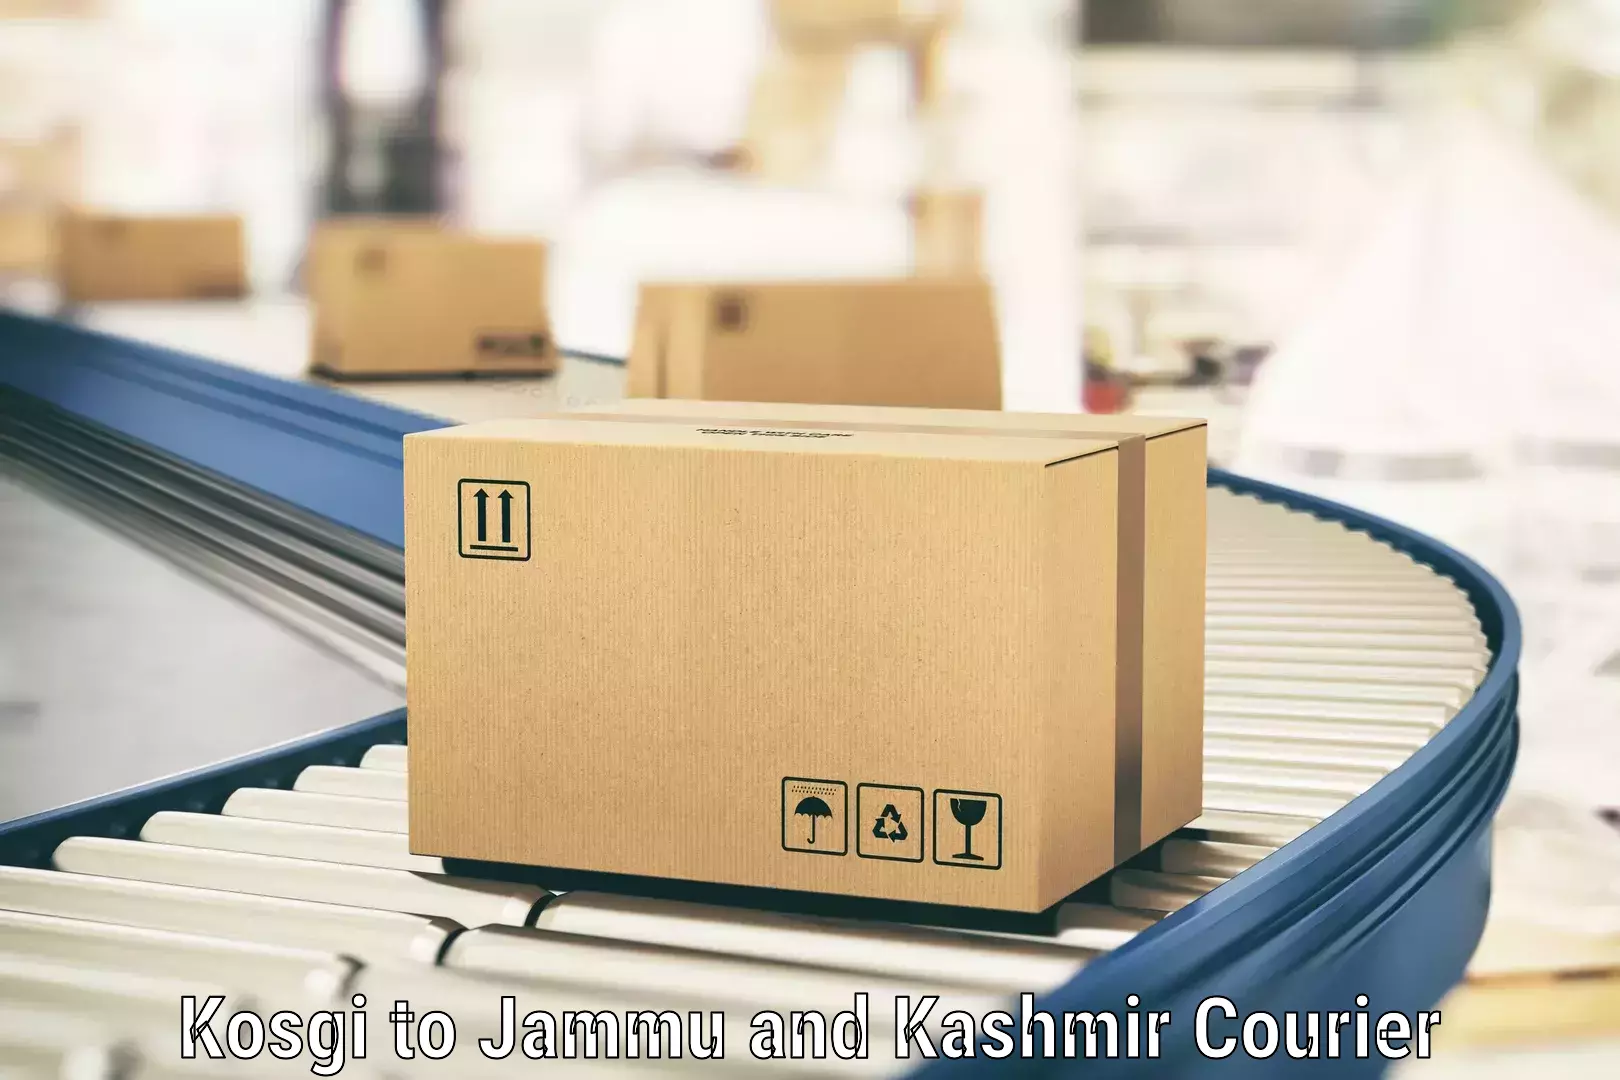 Cost-effective courier options Kosgi to Rajouri